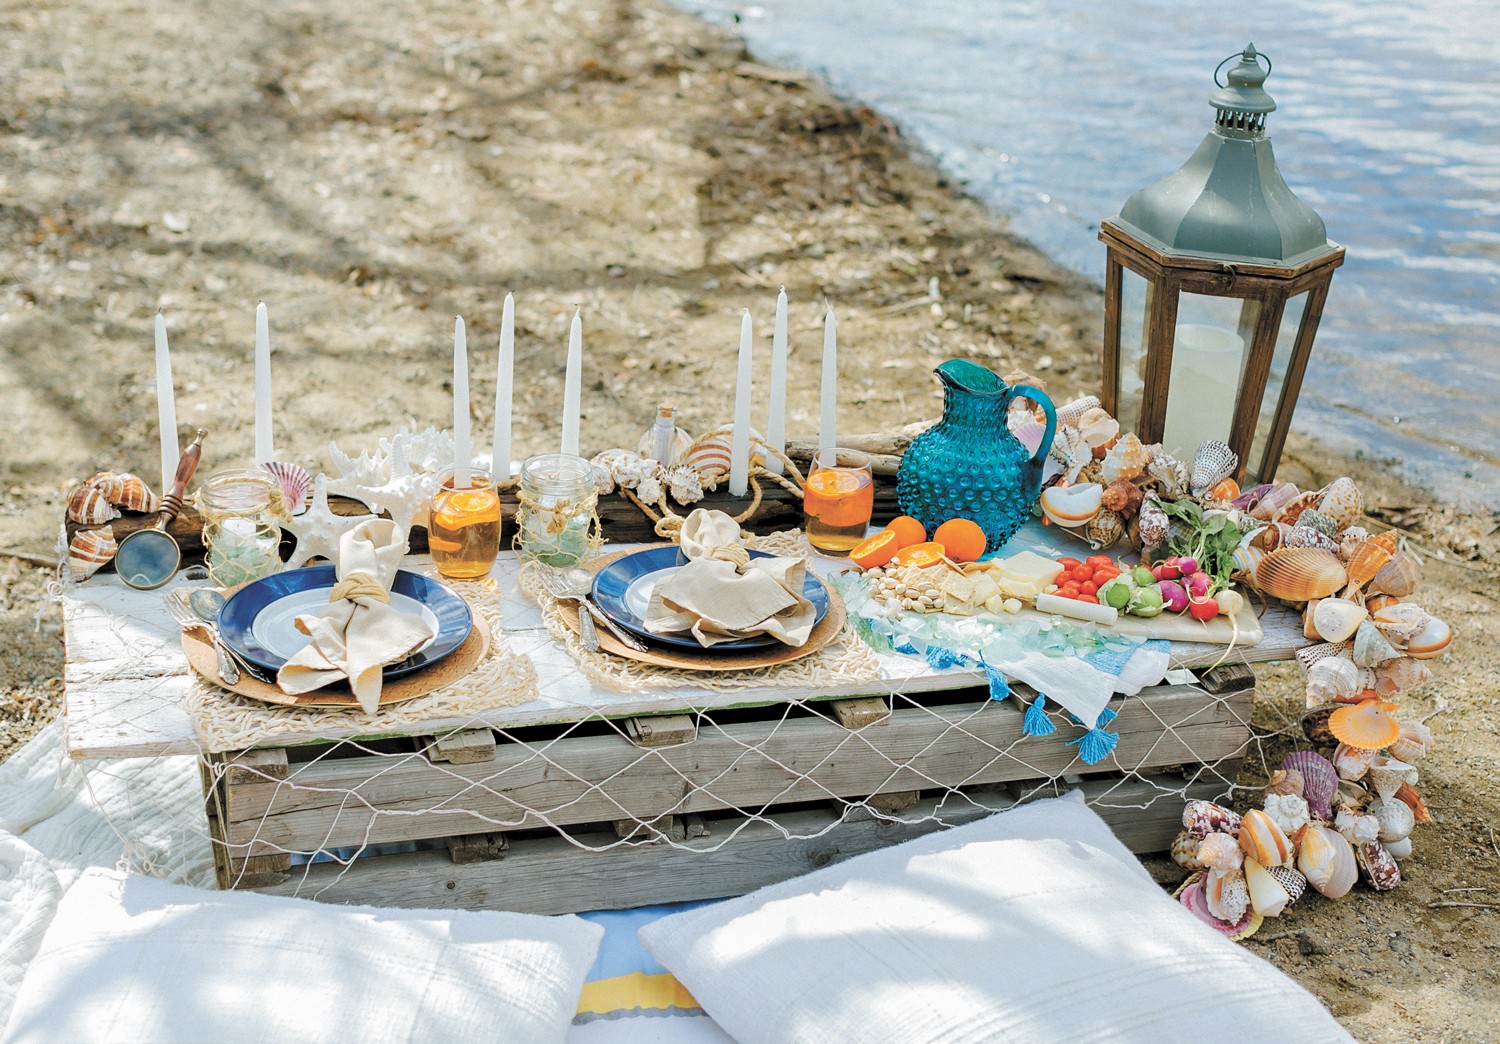 Create a memorable picnic with minimal effort and expense